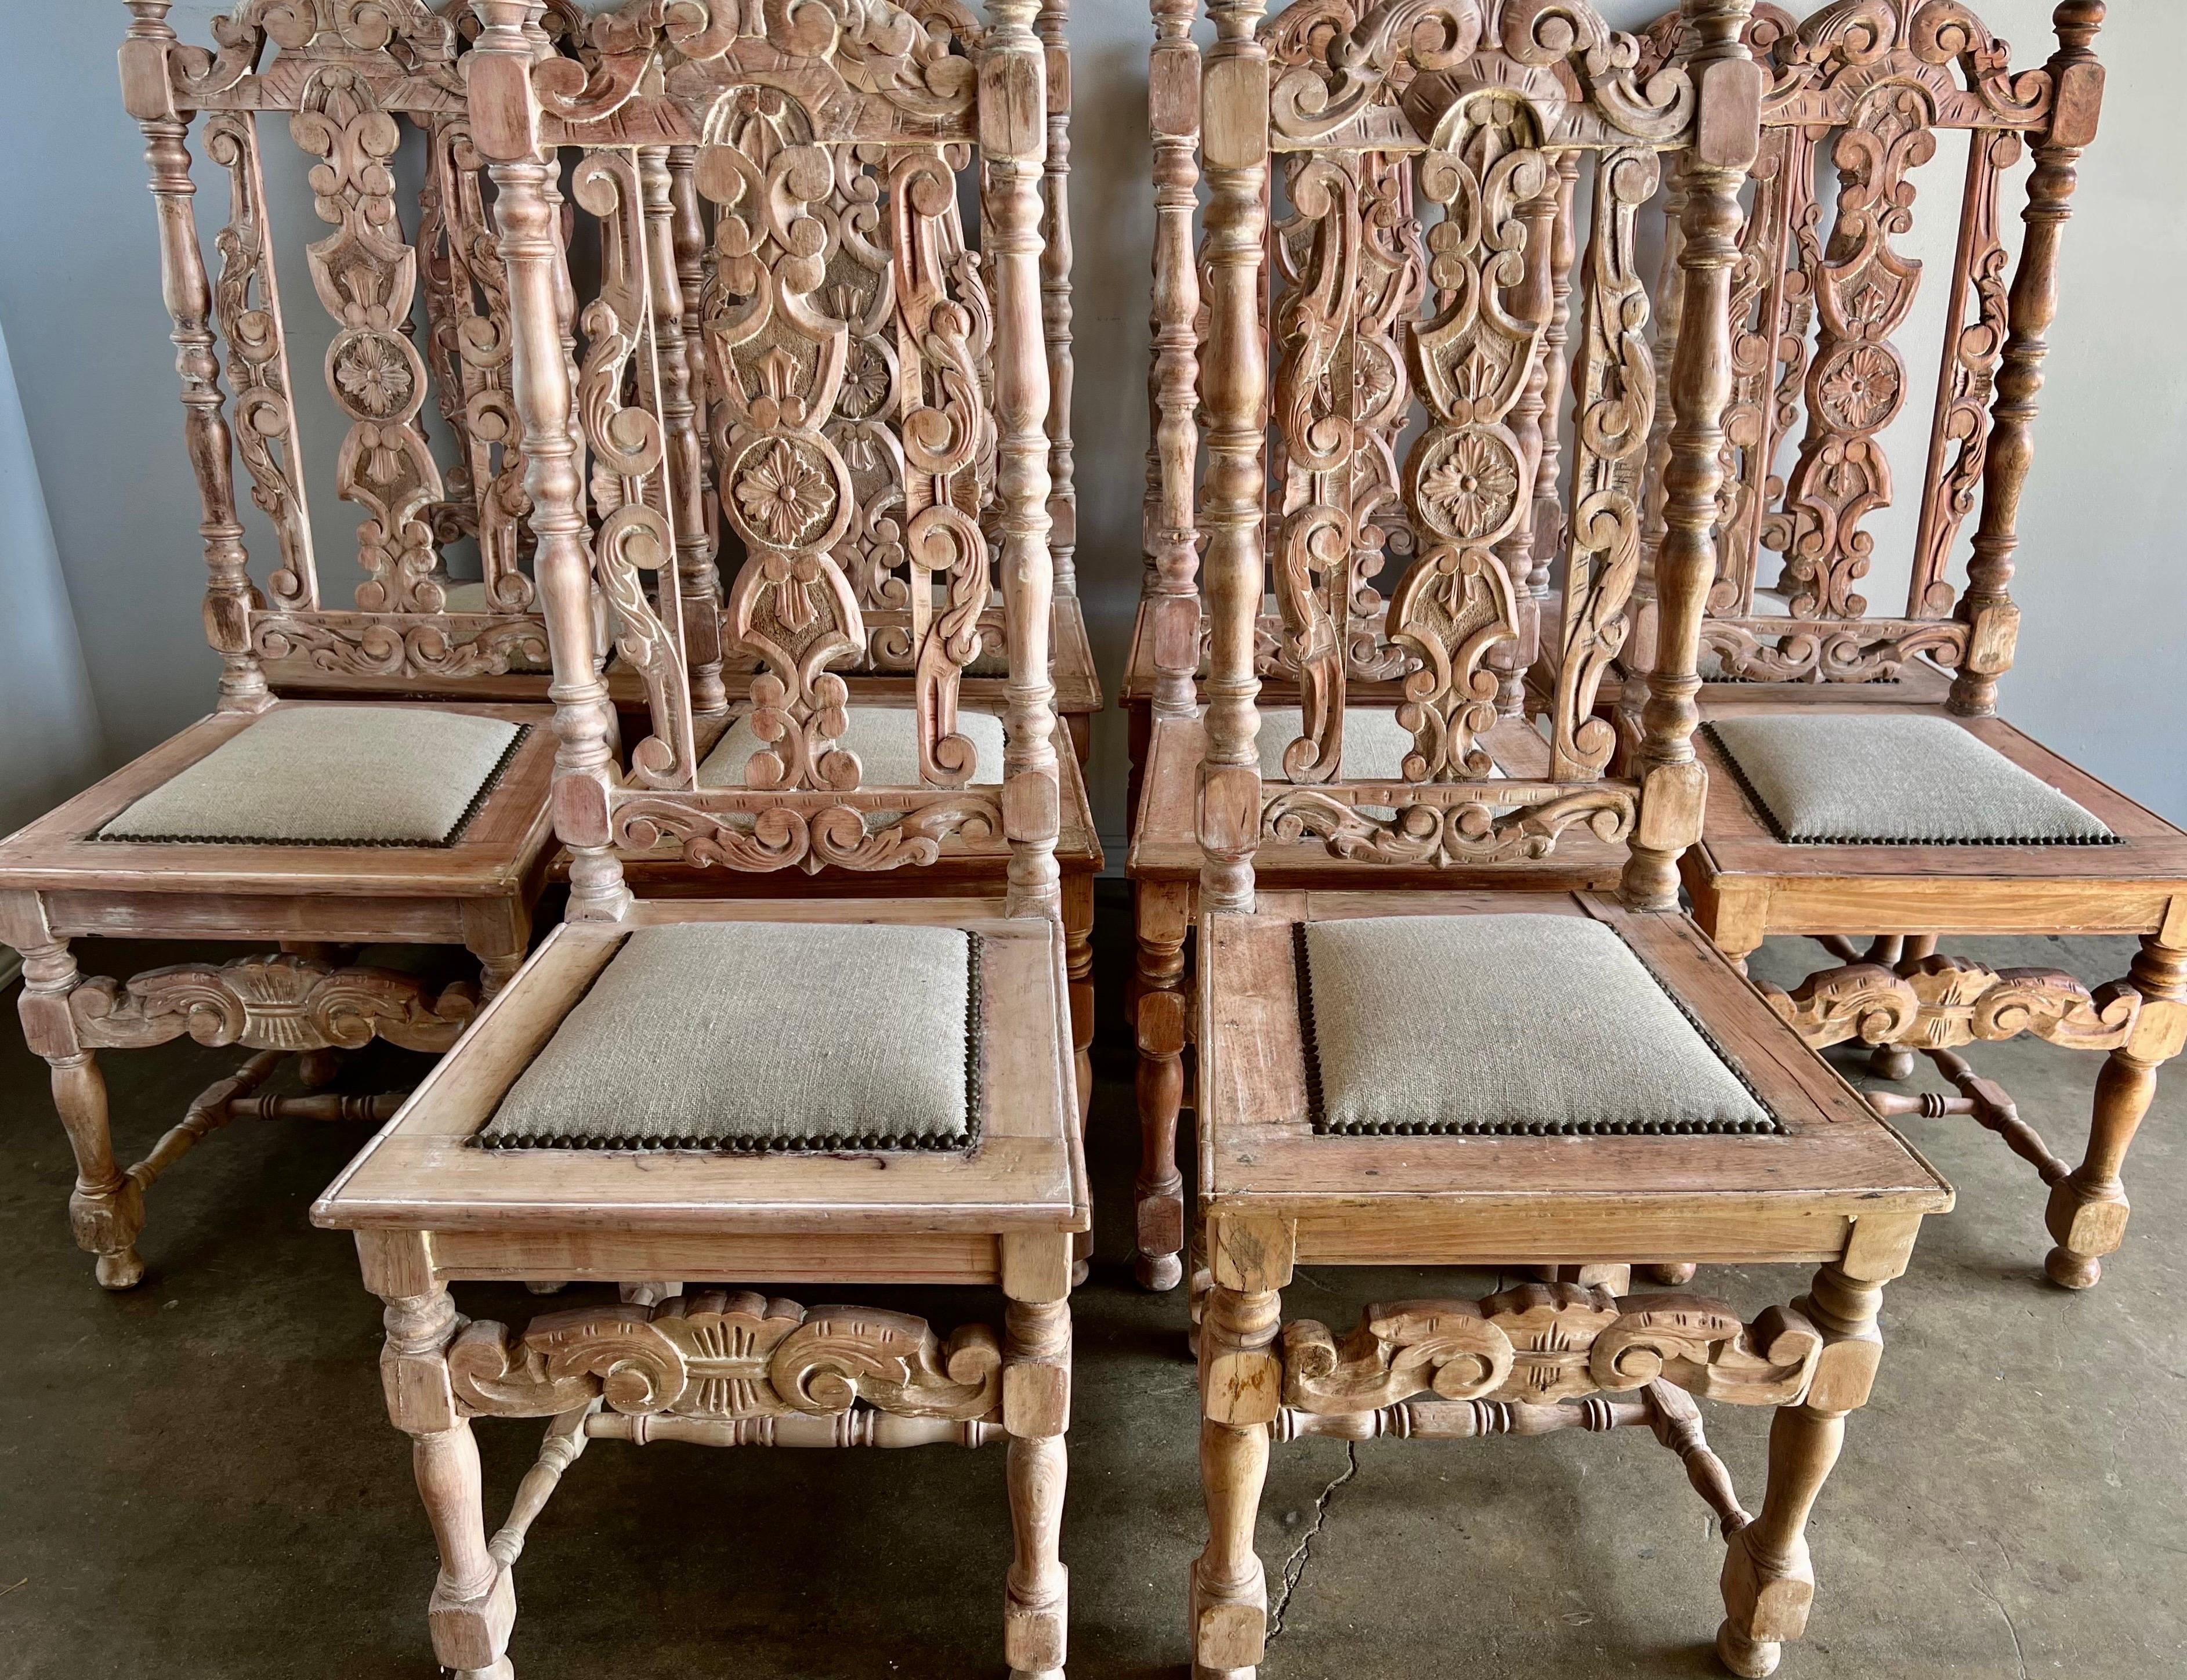 Set of ten bleached walnut Spanish Baroque style dining chairs. The chairs are intricately carved with beautiful details throughout including scrolls, acanthus leaves and flowers throughout the chairs. The dining chairs are newly upholstered in